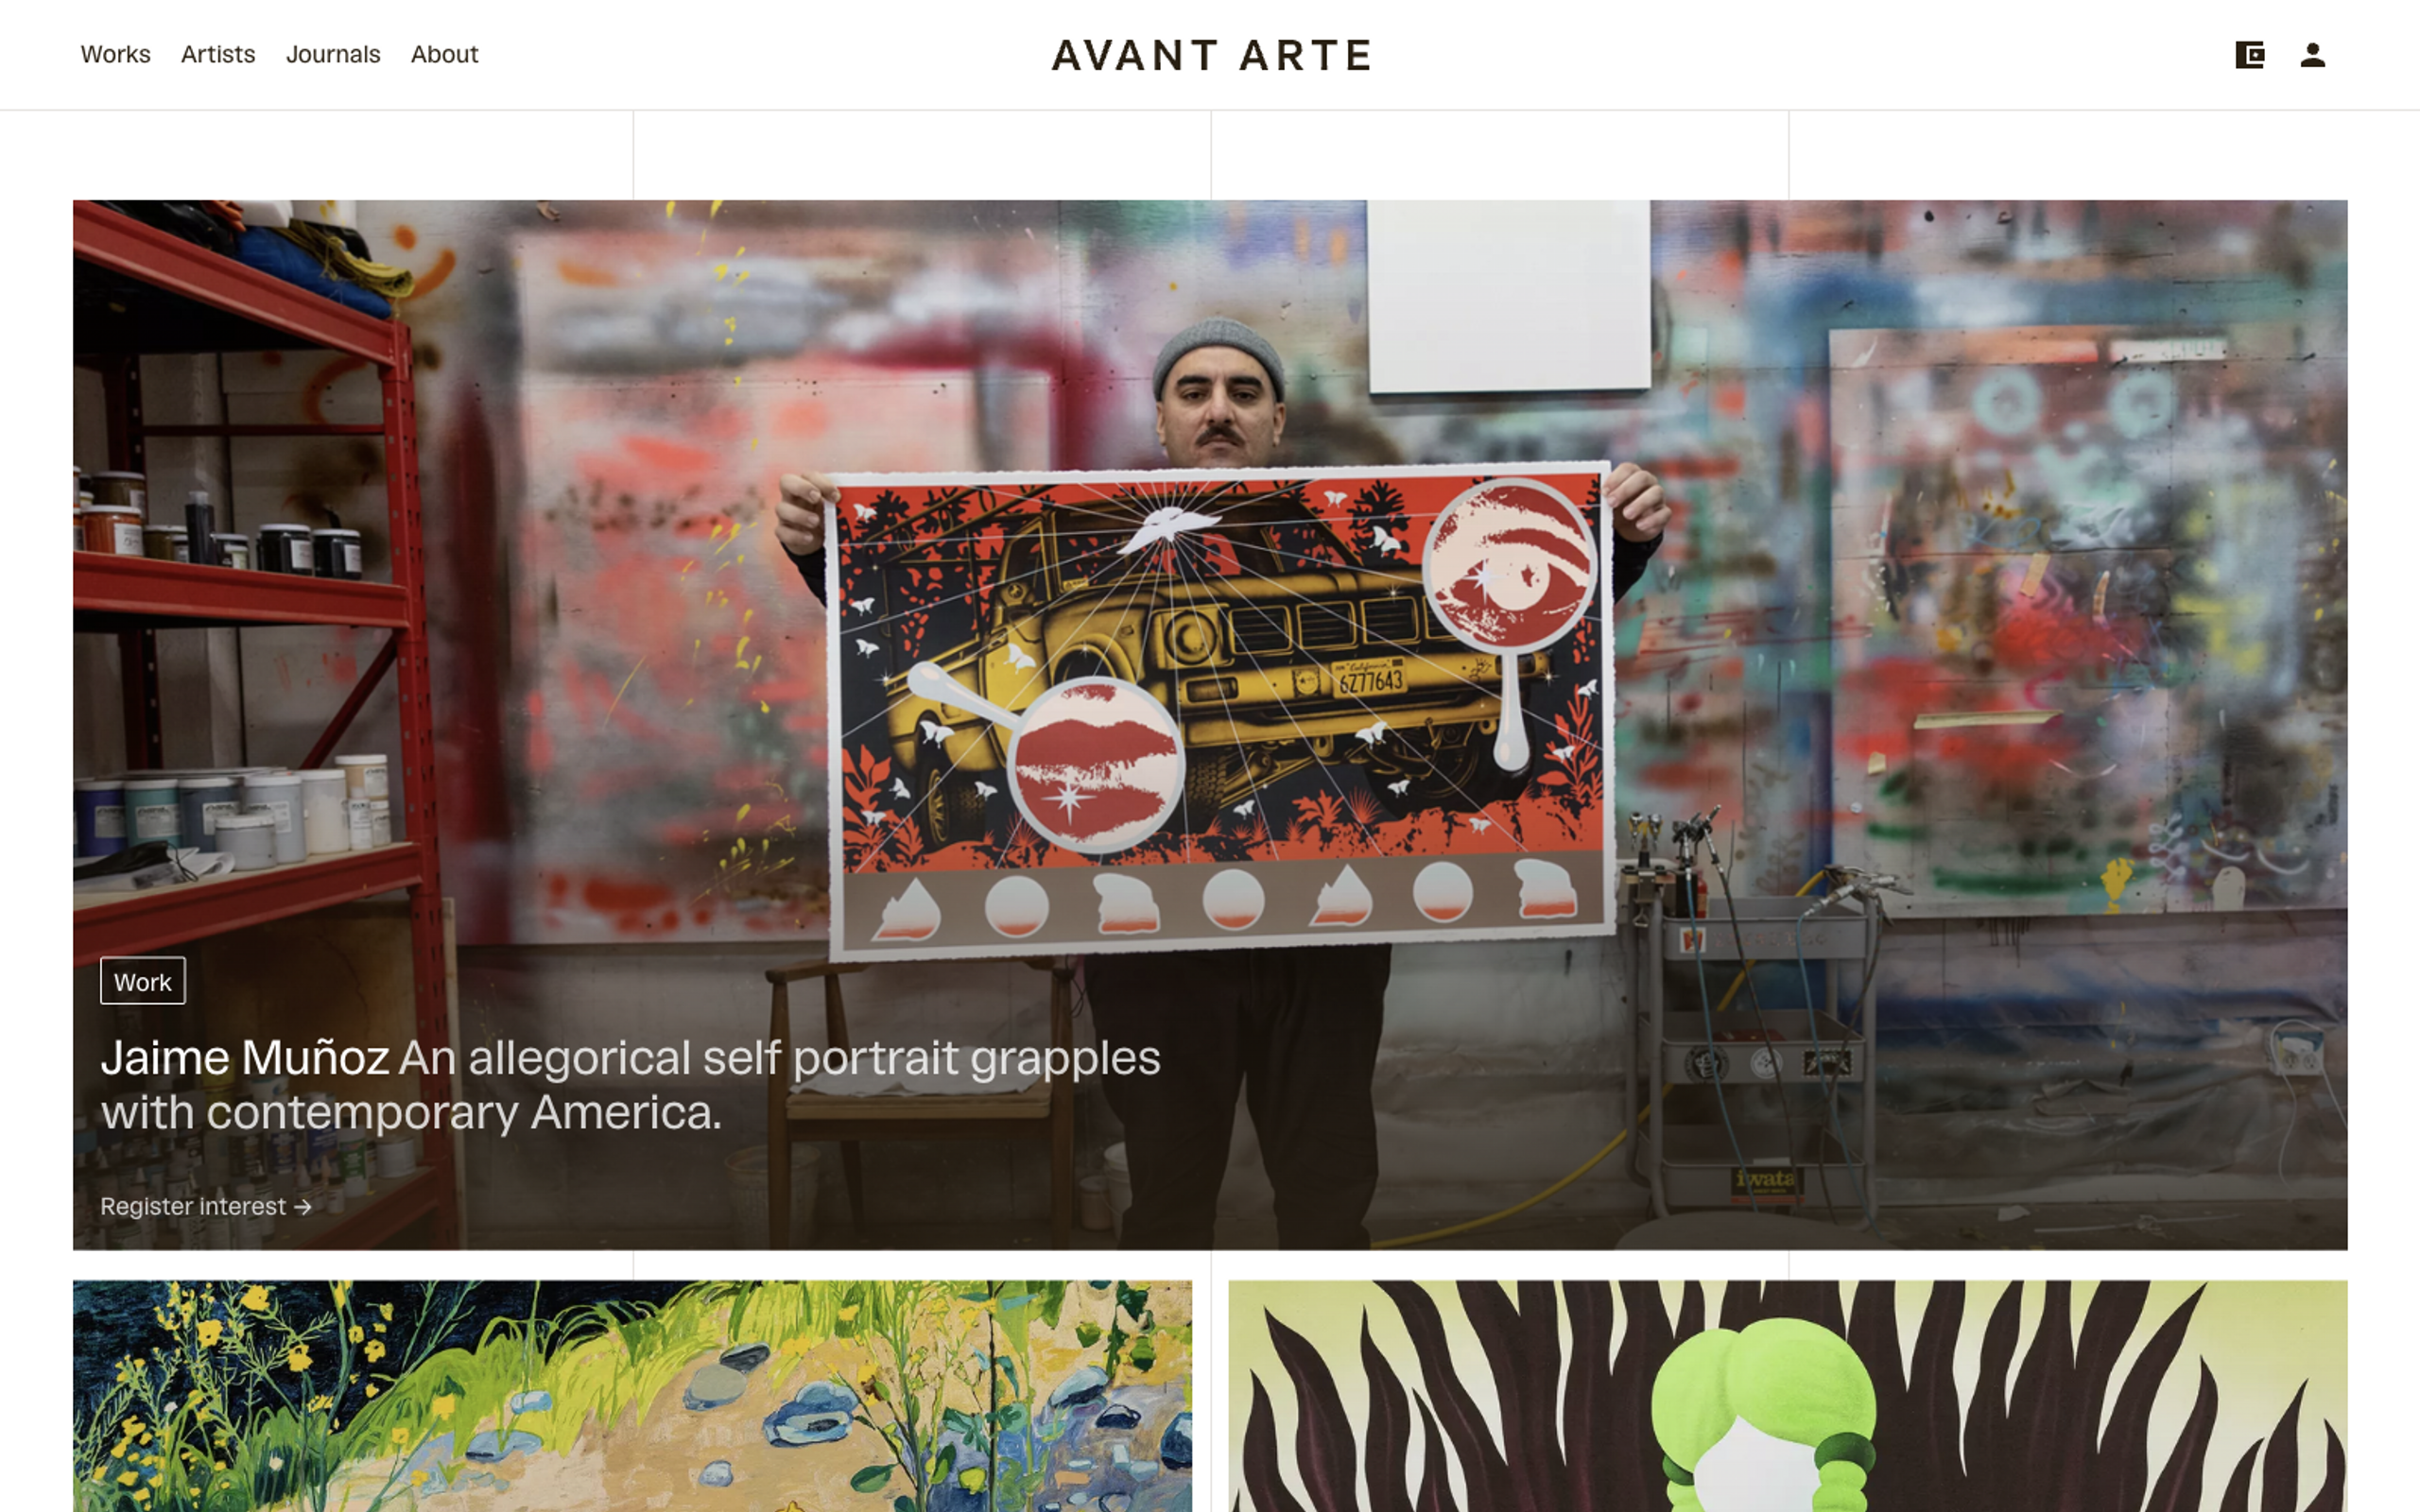 Hero Section of Avant Arte brand, presenting the products